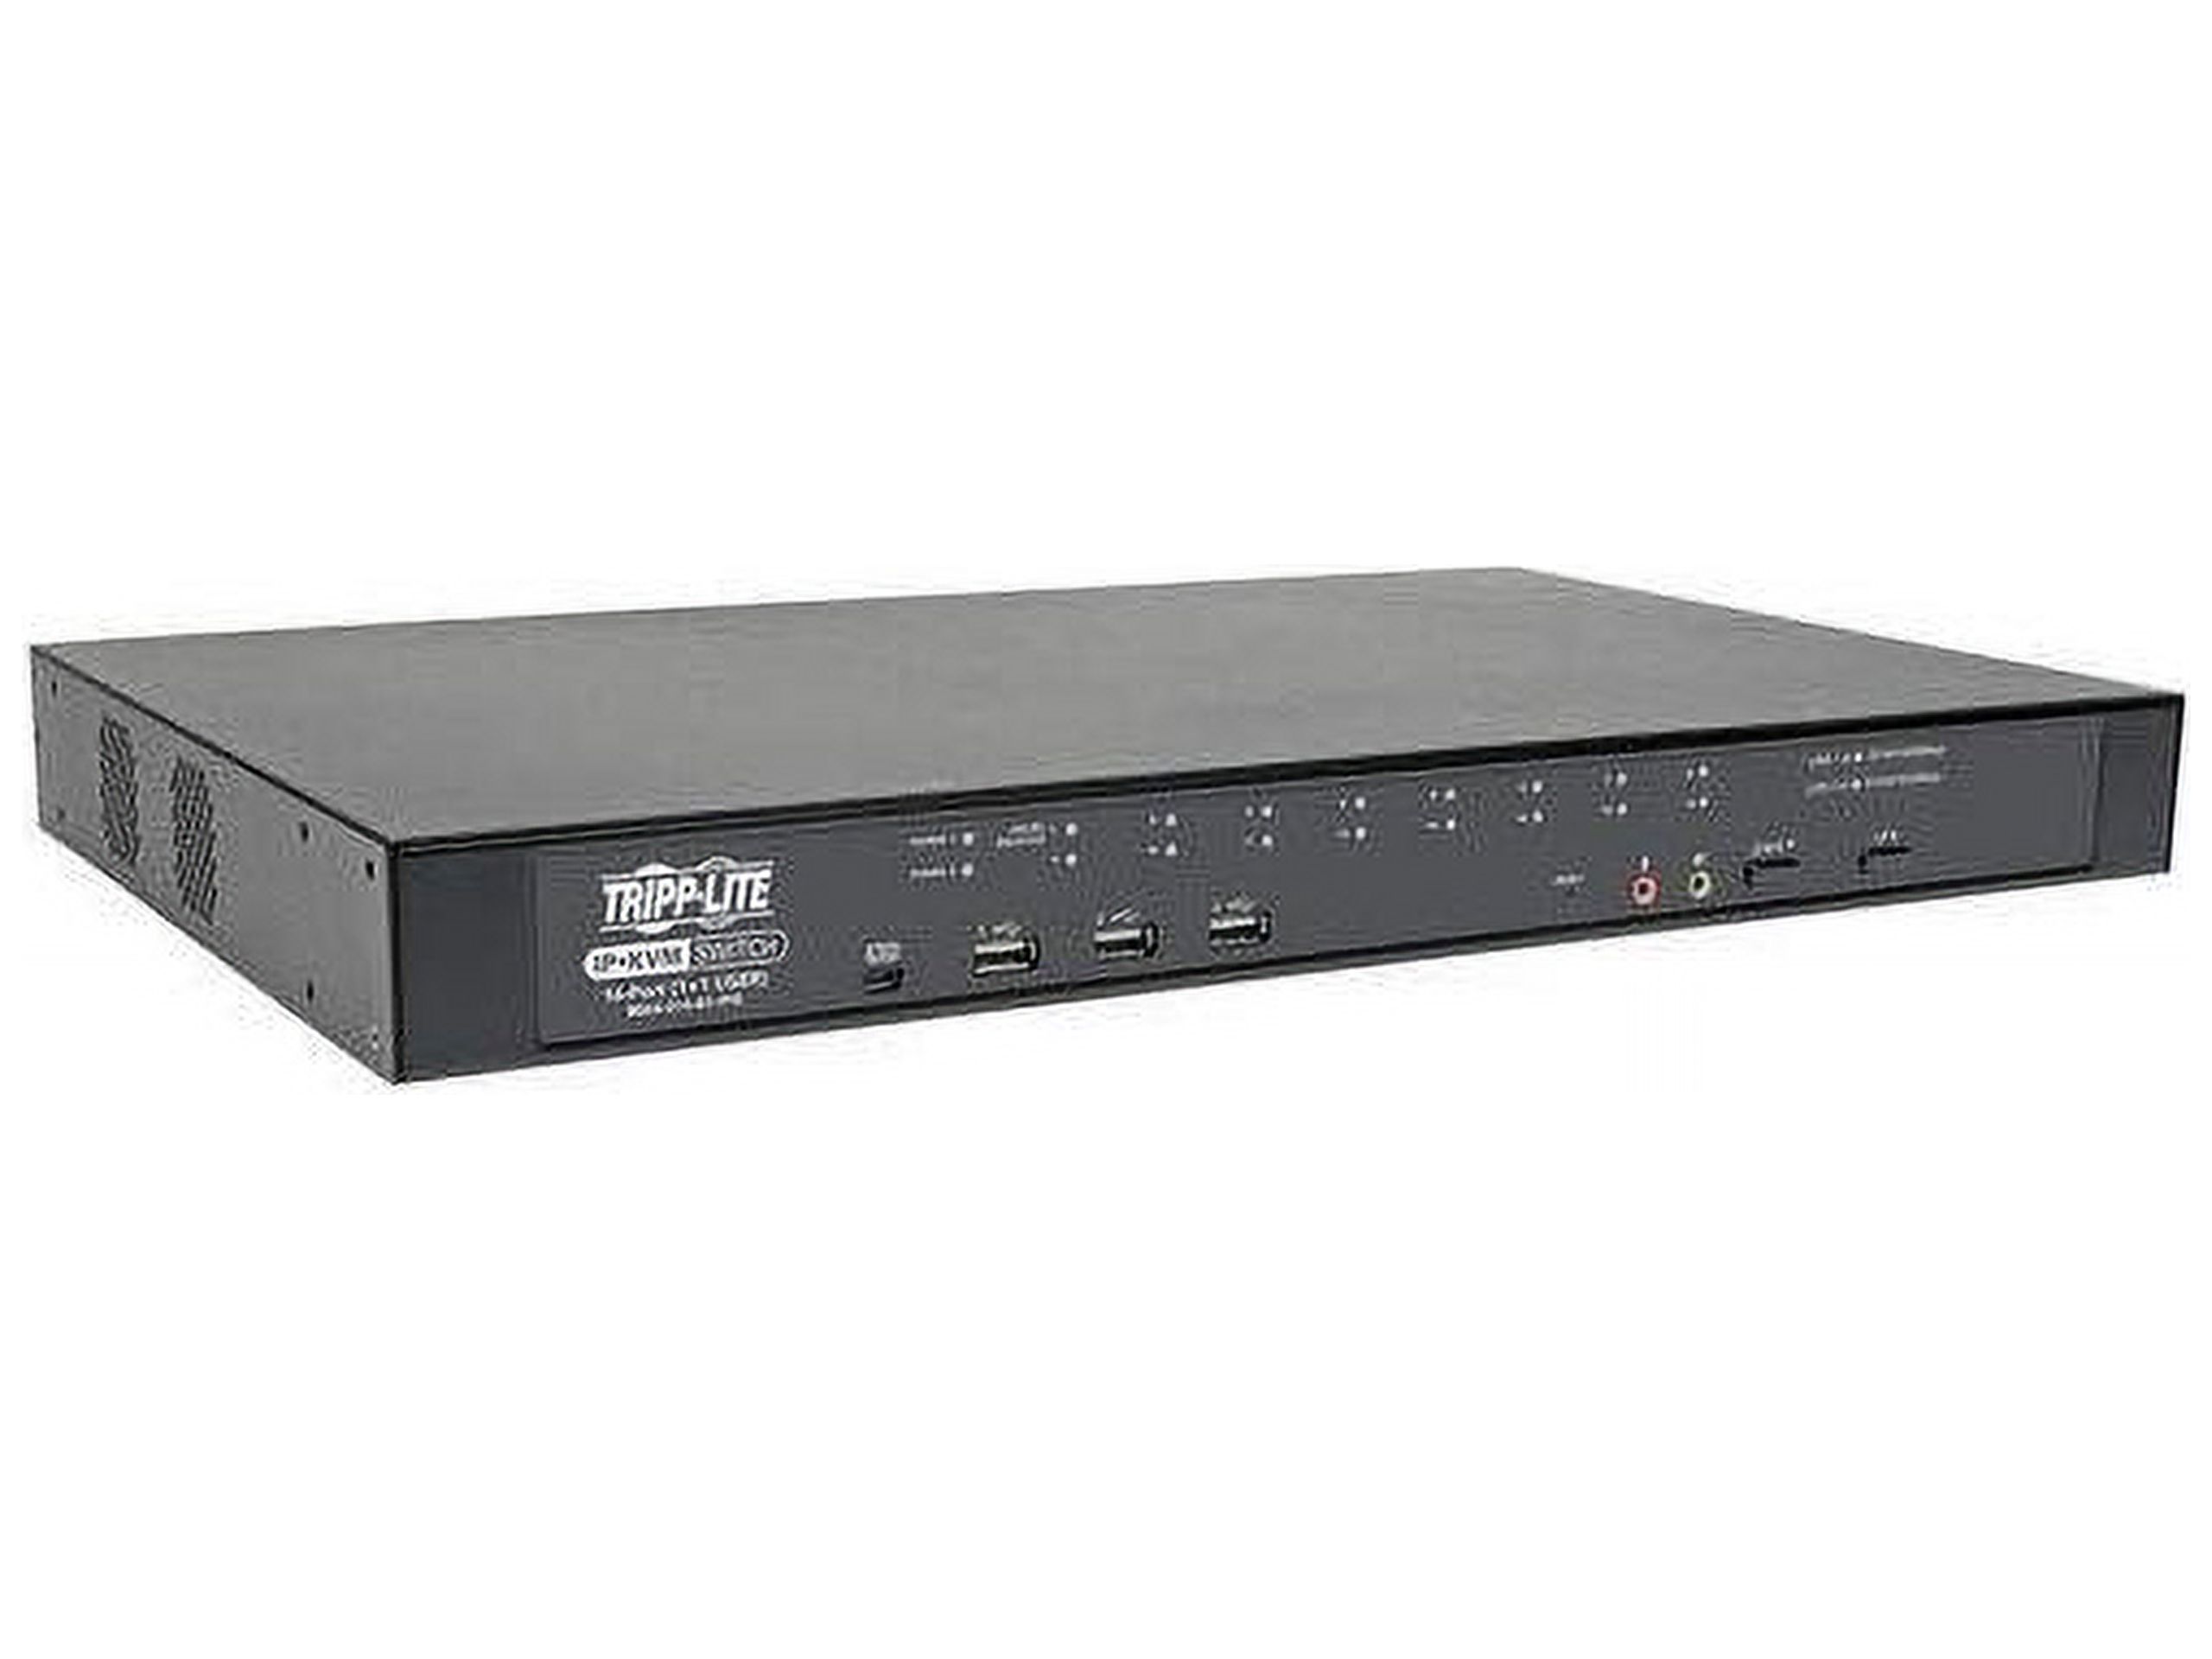 Tripp Lite 16-Port Cat5 KVM over IP Switch with Virtual Media - 1 Local & 1 Remote User, 1U Rack-Mount, TAA - KVM switch - 16 x KVM port(s) - 1 local user - 2 IP users - rack-mountable - government GSA - TAA Compliant - image 4 of 5